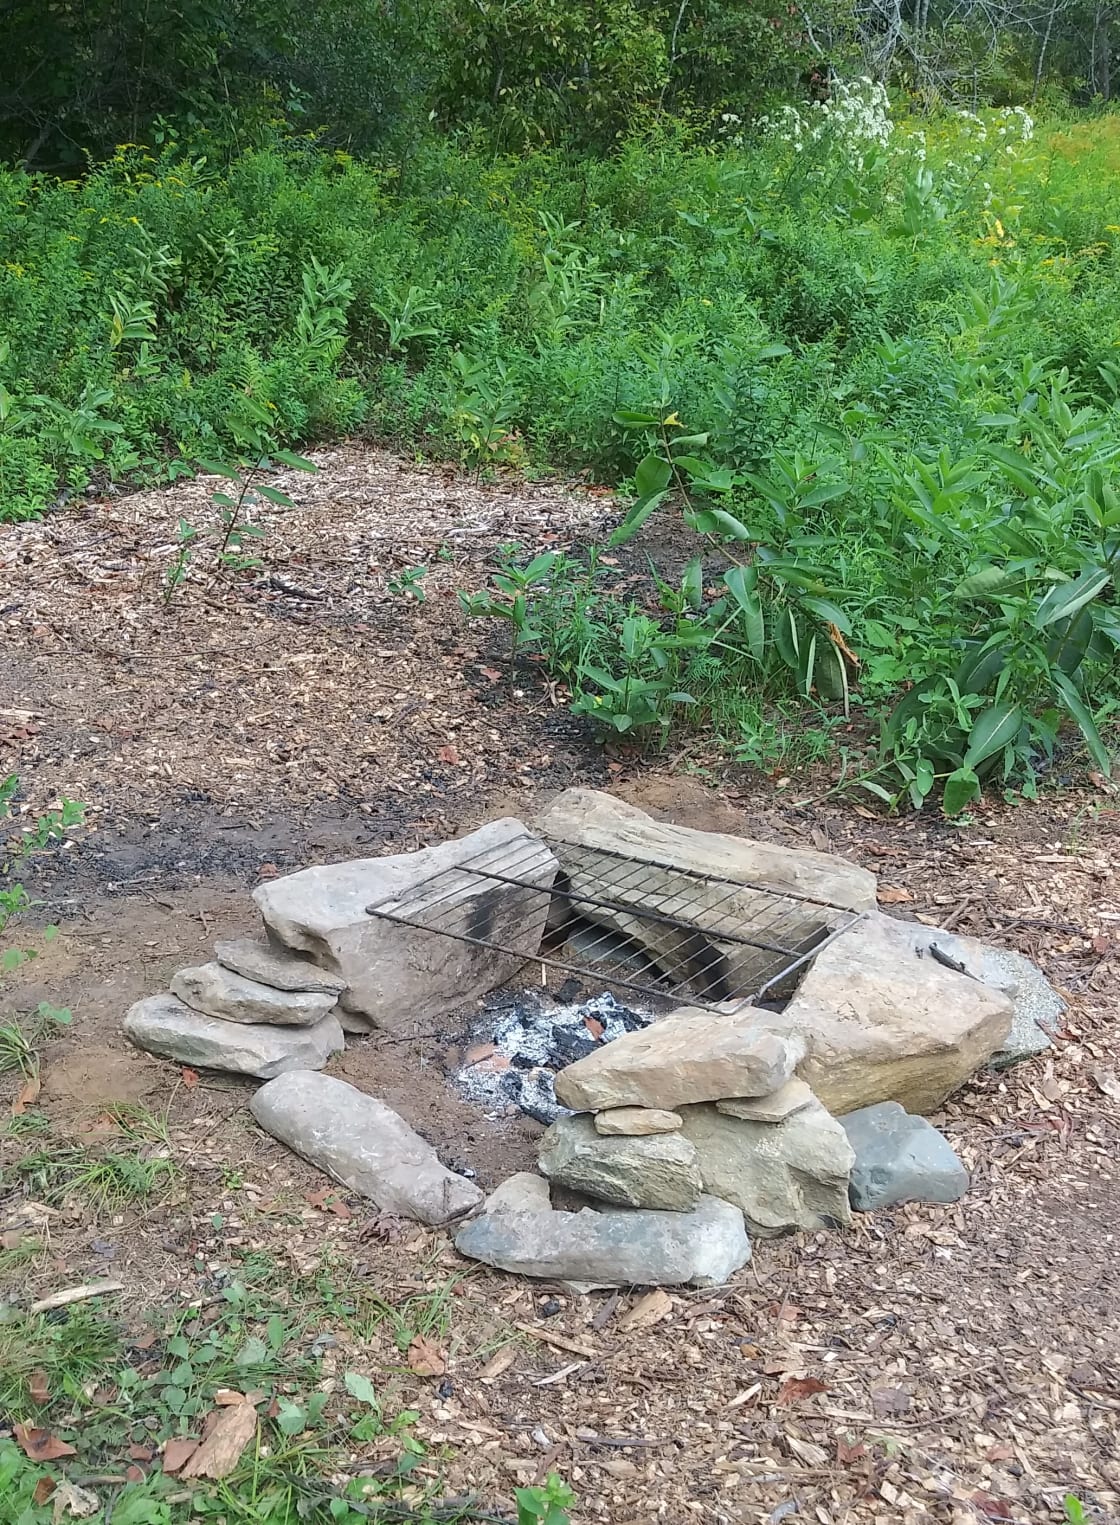 The firepit is not big, but perfect for heating water, cooking meals, toasting marshmallows, or just watching the flames.  I can provide wood for $5 a bundle or you can pick up your own locally.  